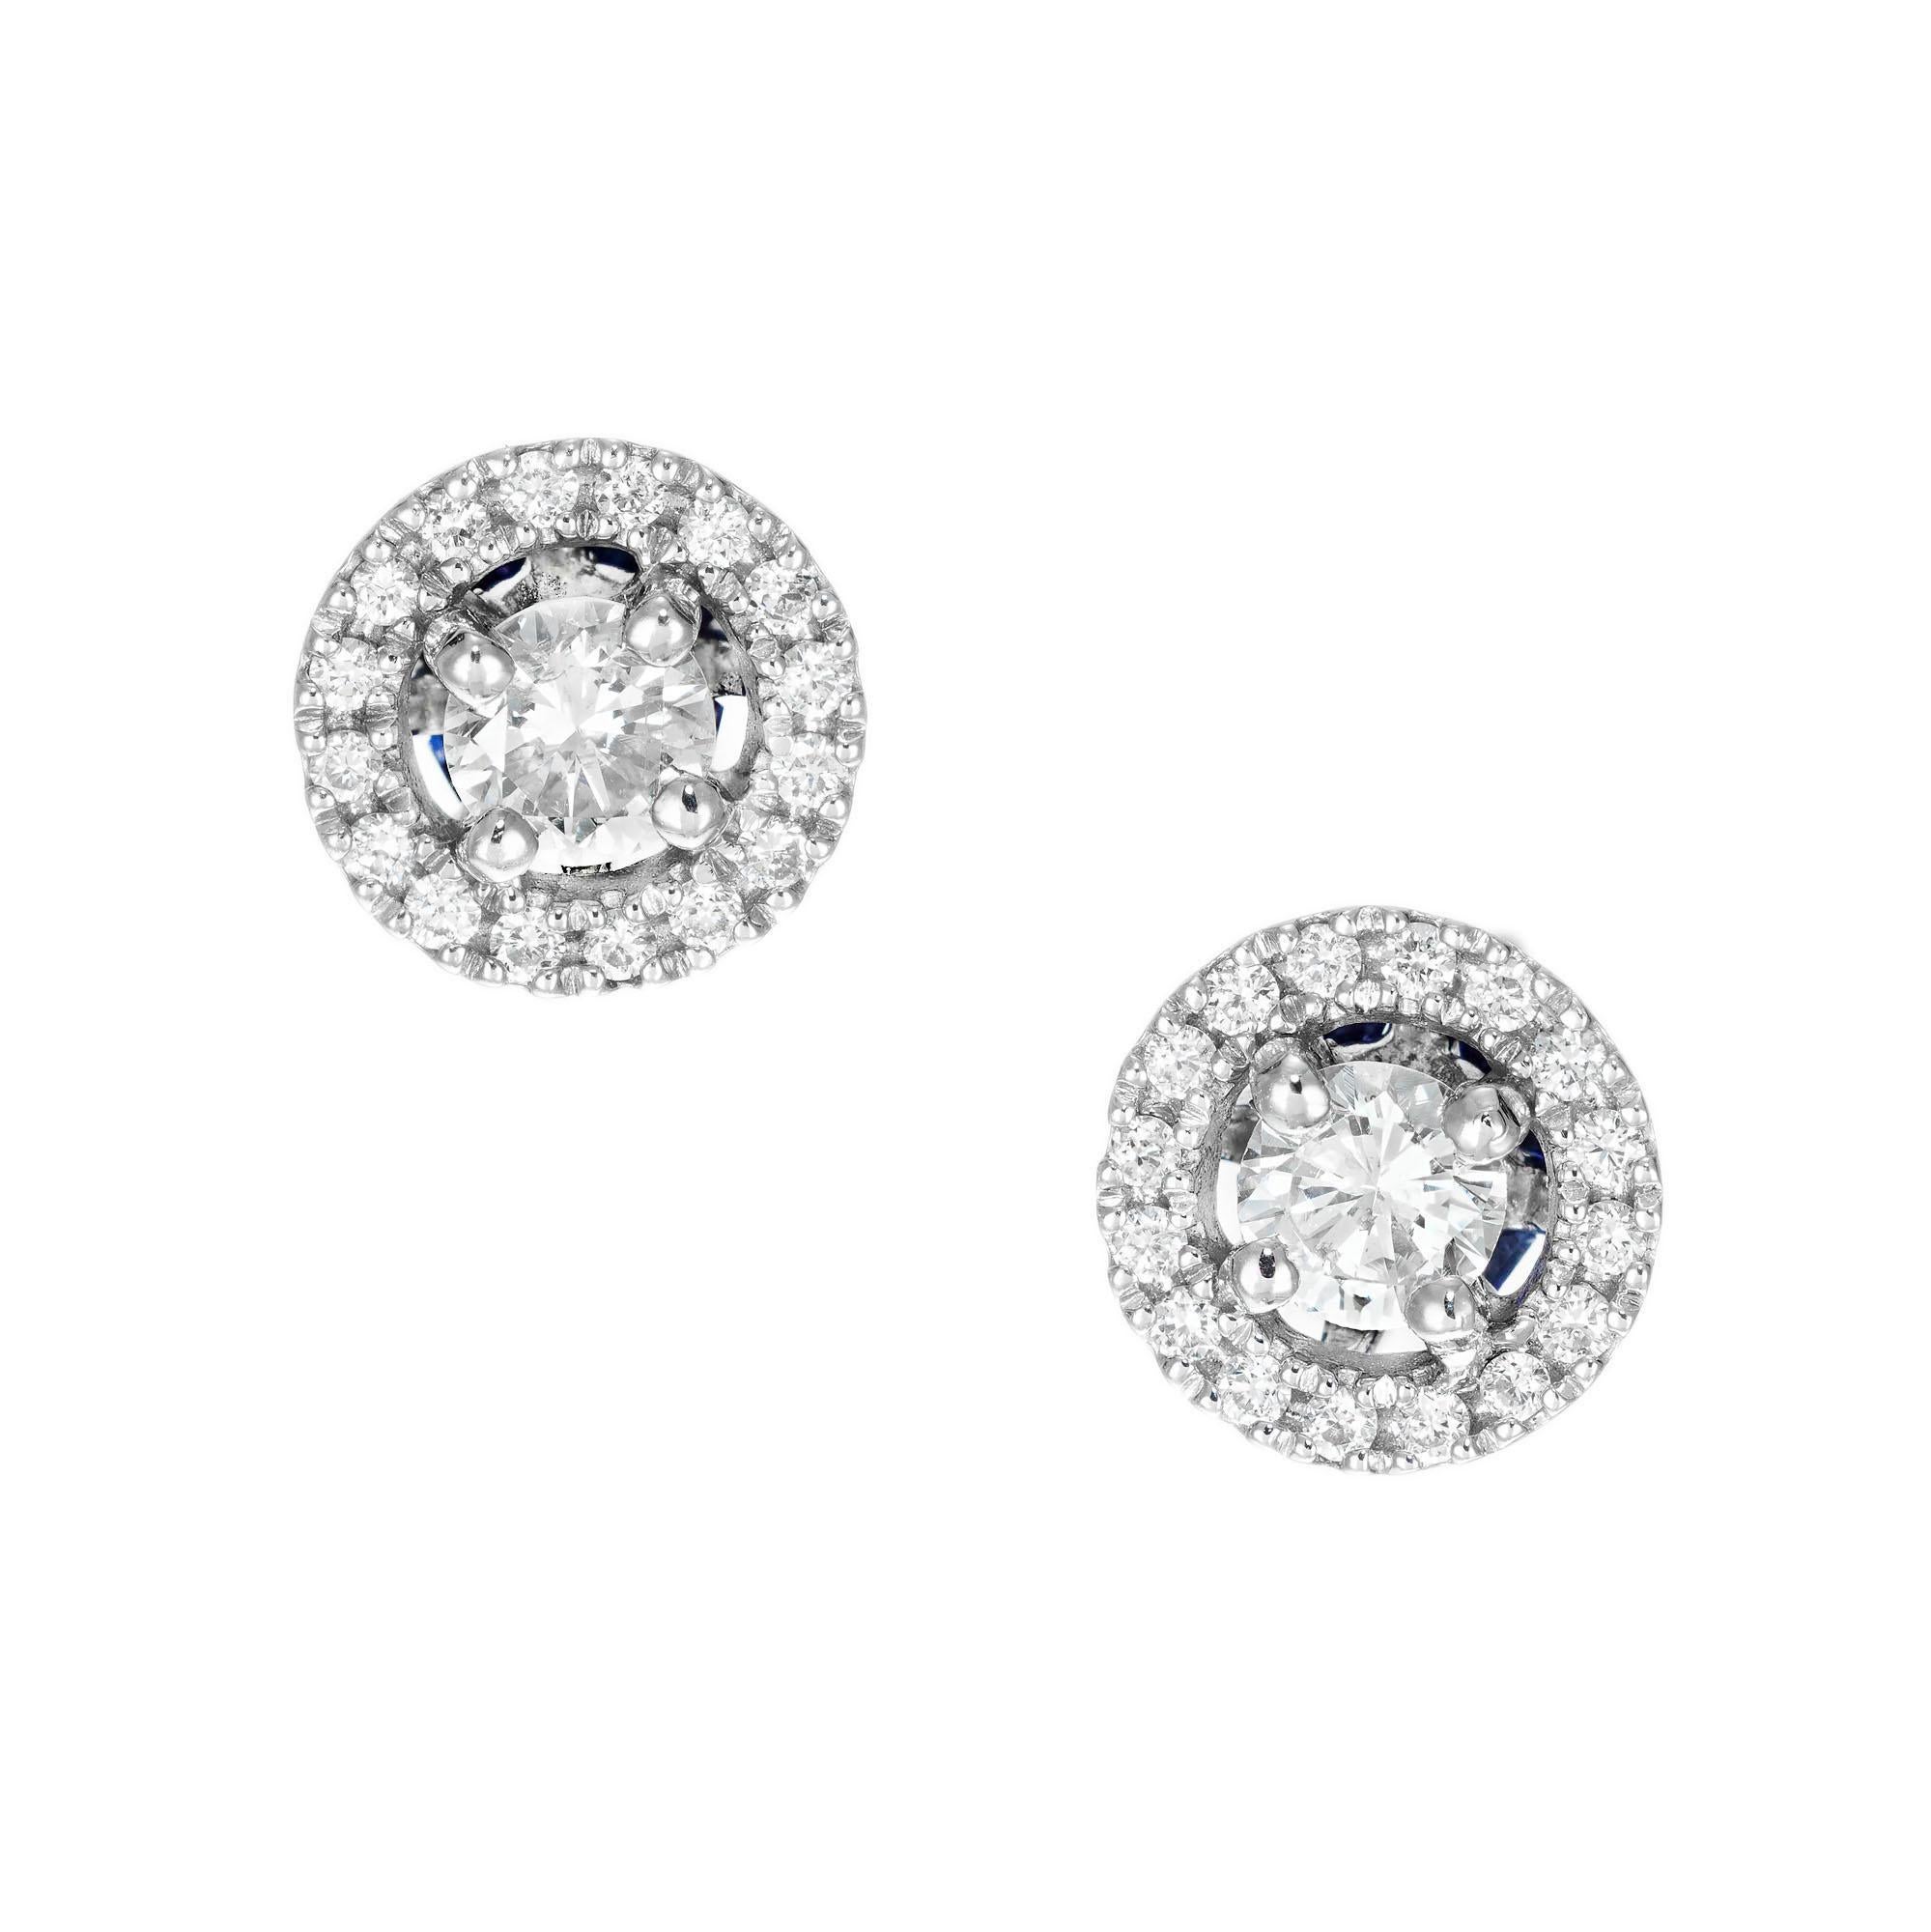 Vera Wang Diamond and sapphire stud earrings. 2 round diamonds with 2 halos of 16 round diamonds each accented with 4 square cut sapphires on each 14k white gold baskets. 

2 round diamonds total approx total weight: .34cts H, SI
32 round diamonds